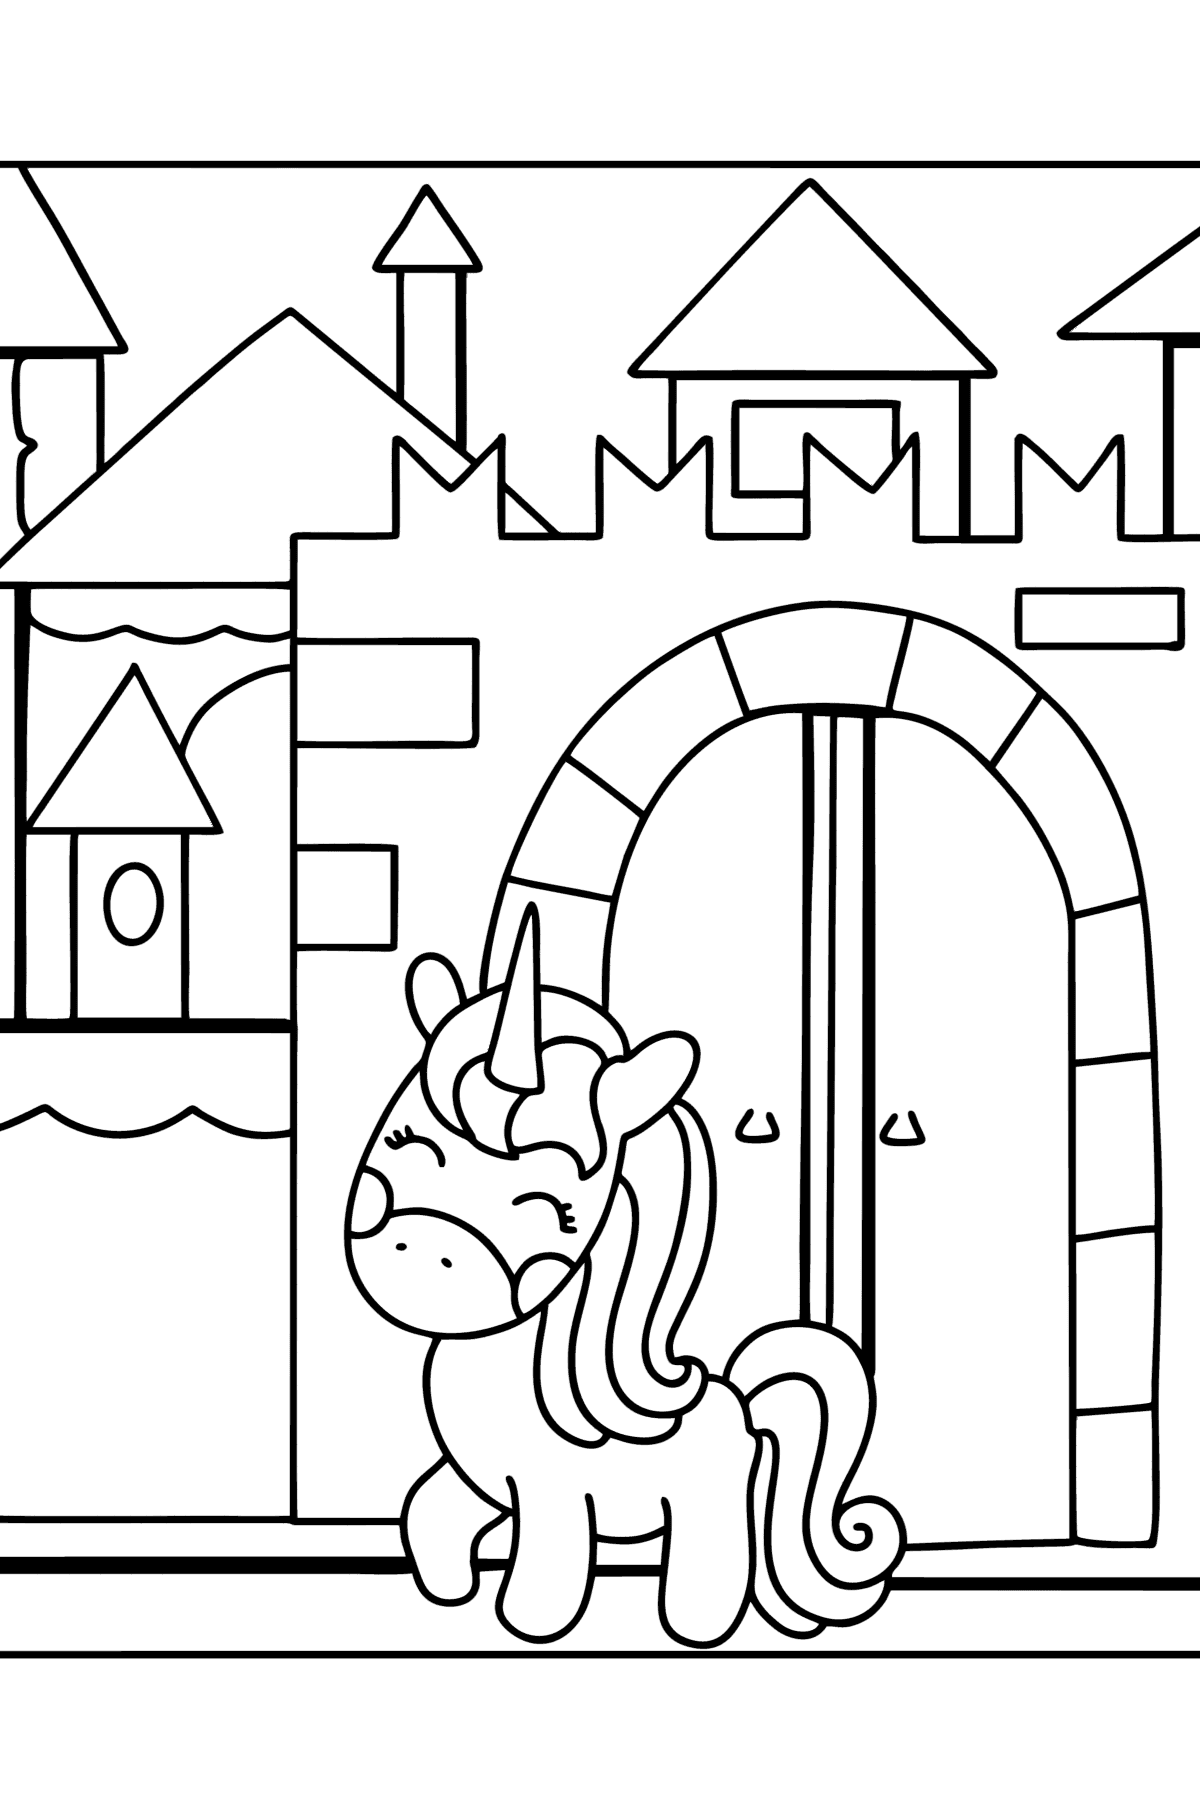 Dreamland coloring page - Coloring Pages for Kids